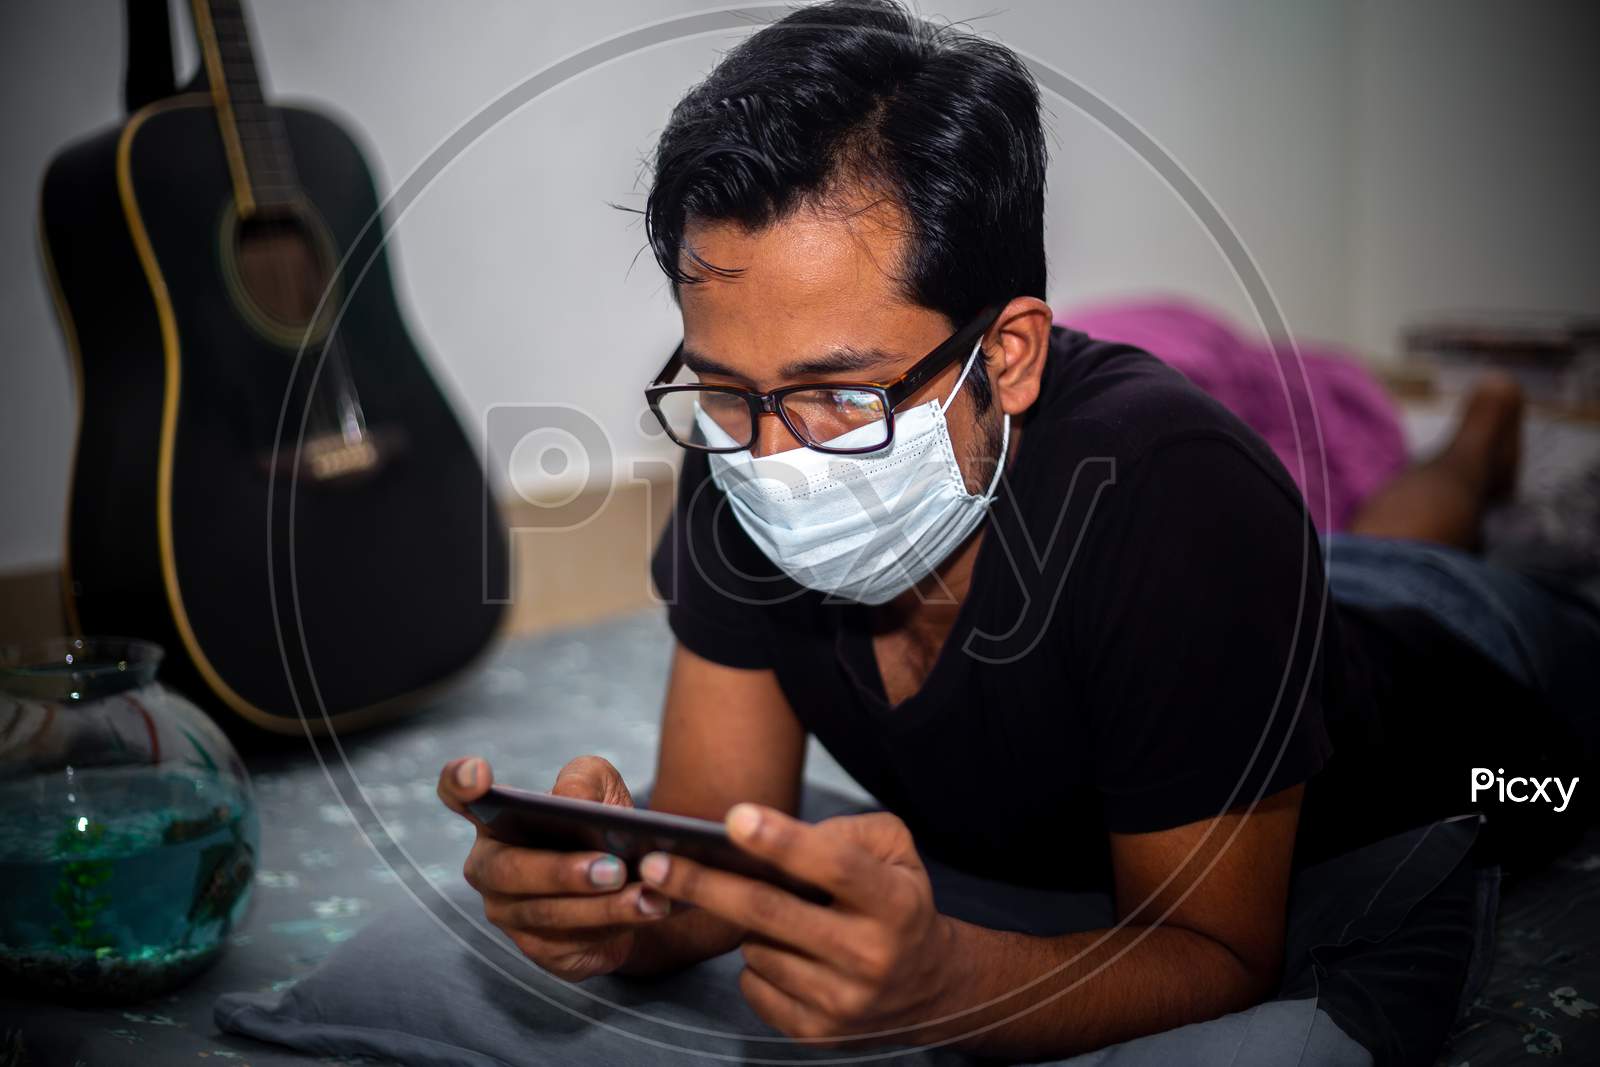 A Surgical Mask-Wearing Young Man Was Playing Mobile Games On His Own Home Due To Coronavirus Home-Quarantine At Dhaka.